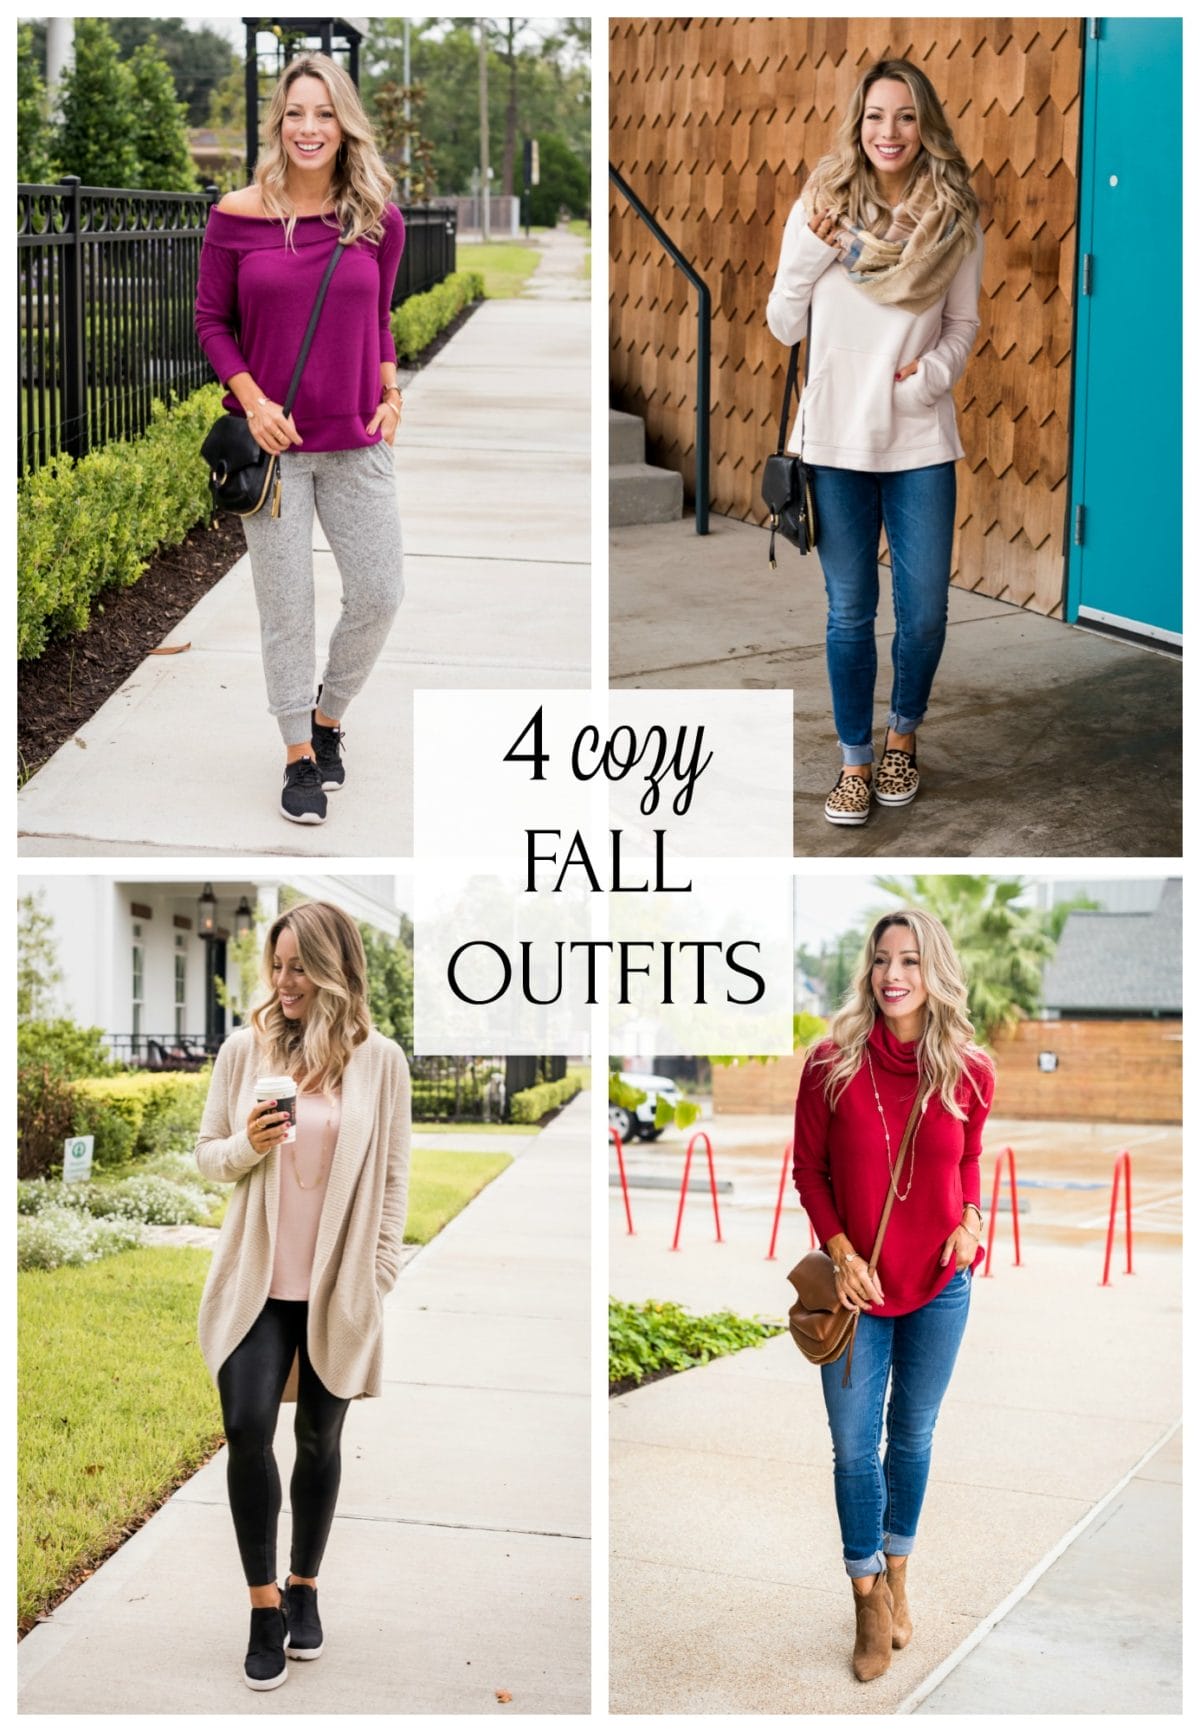 Cozy Fall Outfits